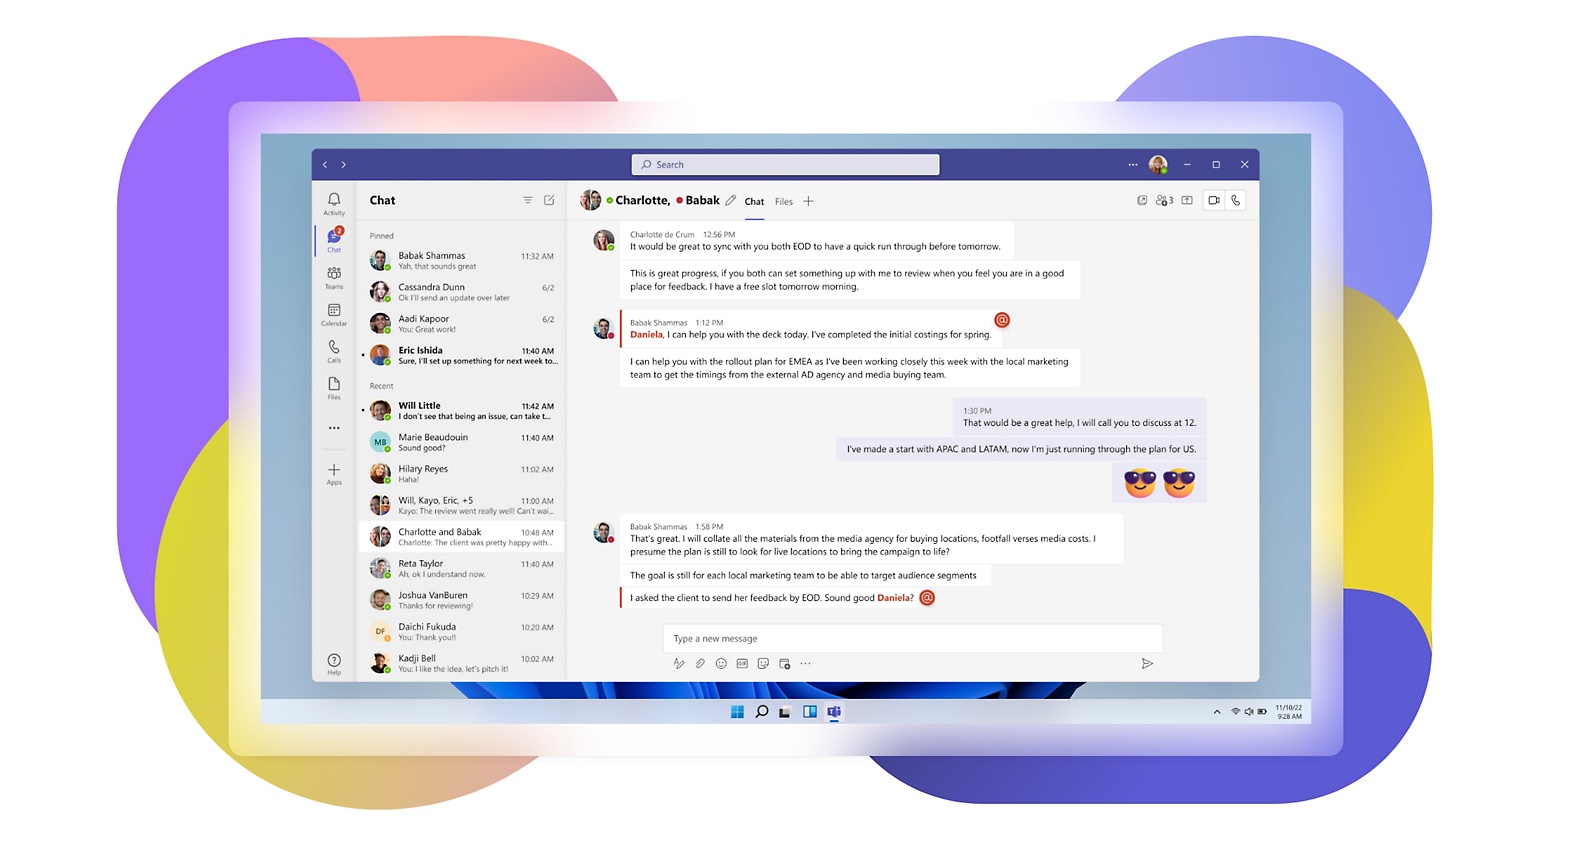 Microsoft Teams 2.0 to Become the Default Client Later This Year